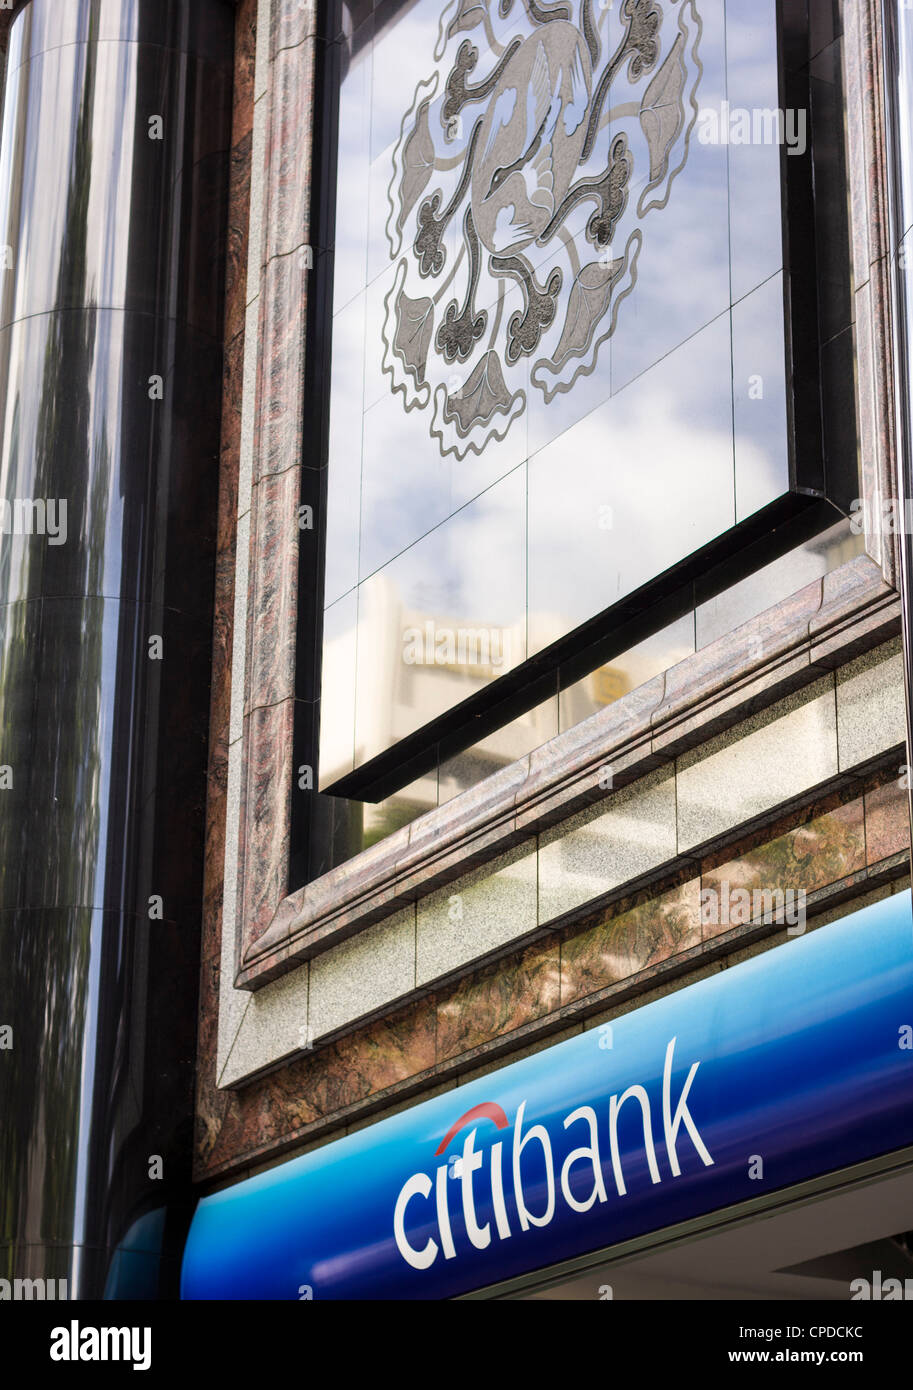 Citibank branch sign, Orchard Rd Singapore Stock Photo